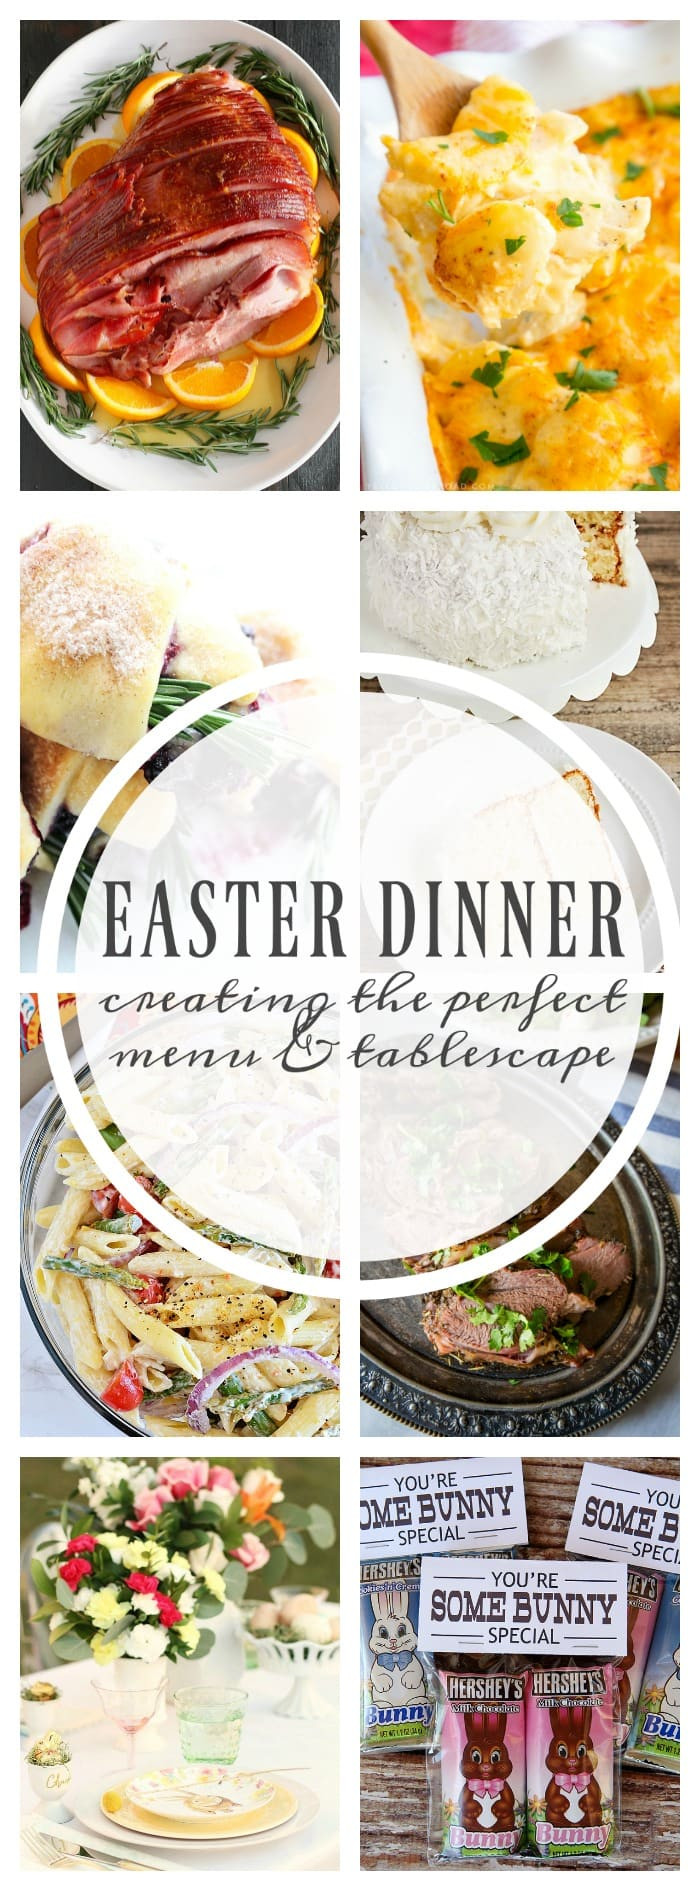 Easter Ham Dinner Menu
 EASTER DINNER CREATING THE PERFECT MENU & TABLESCAPE A